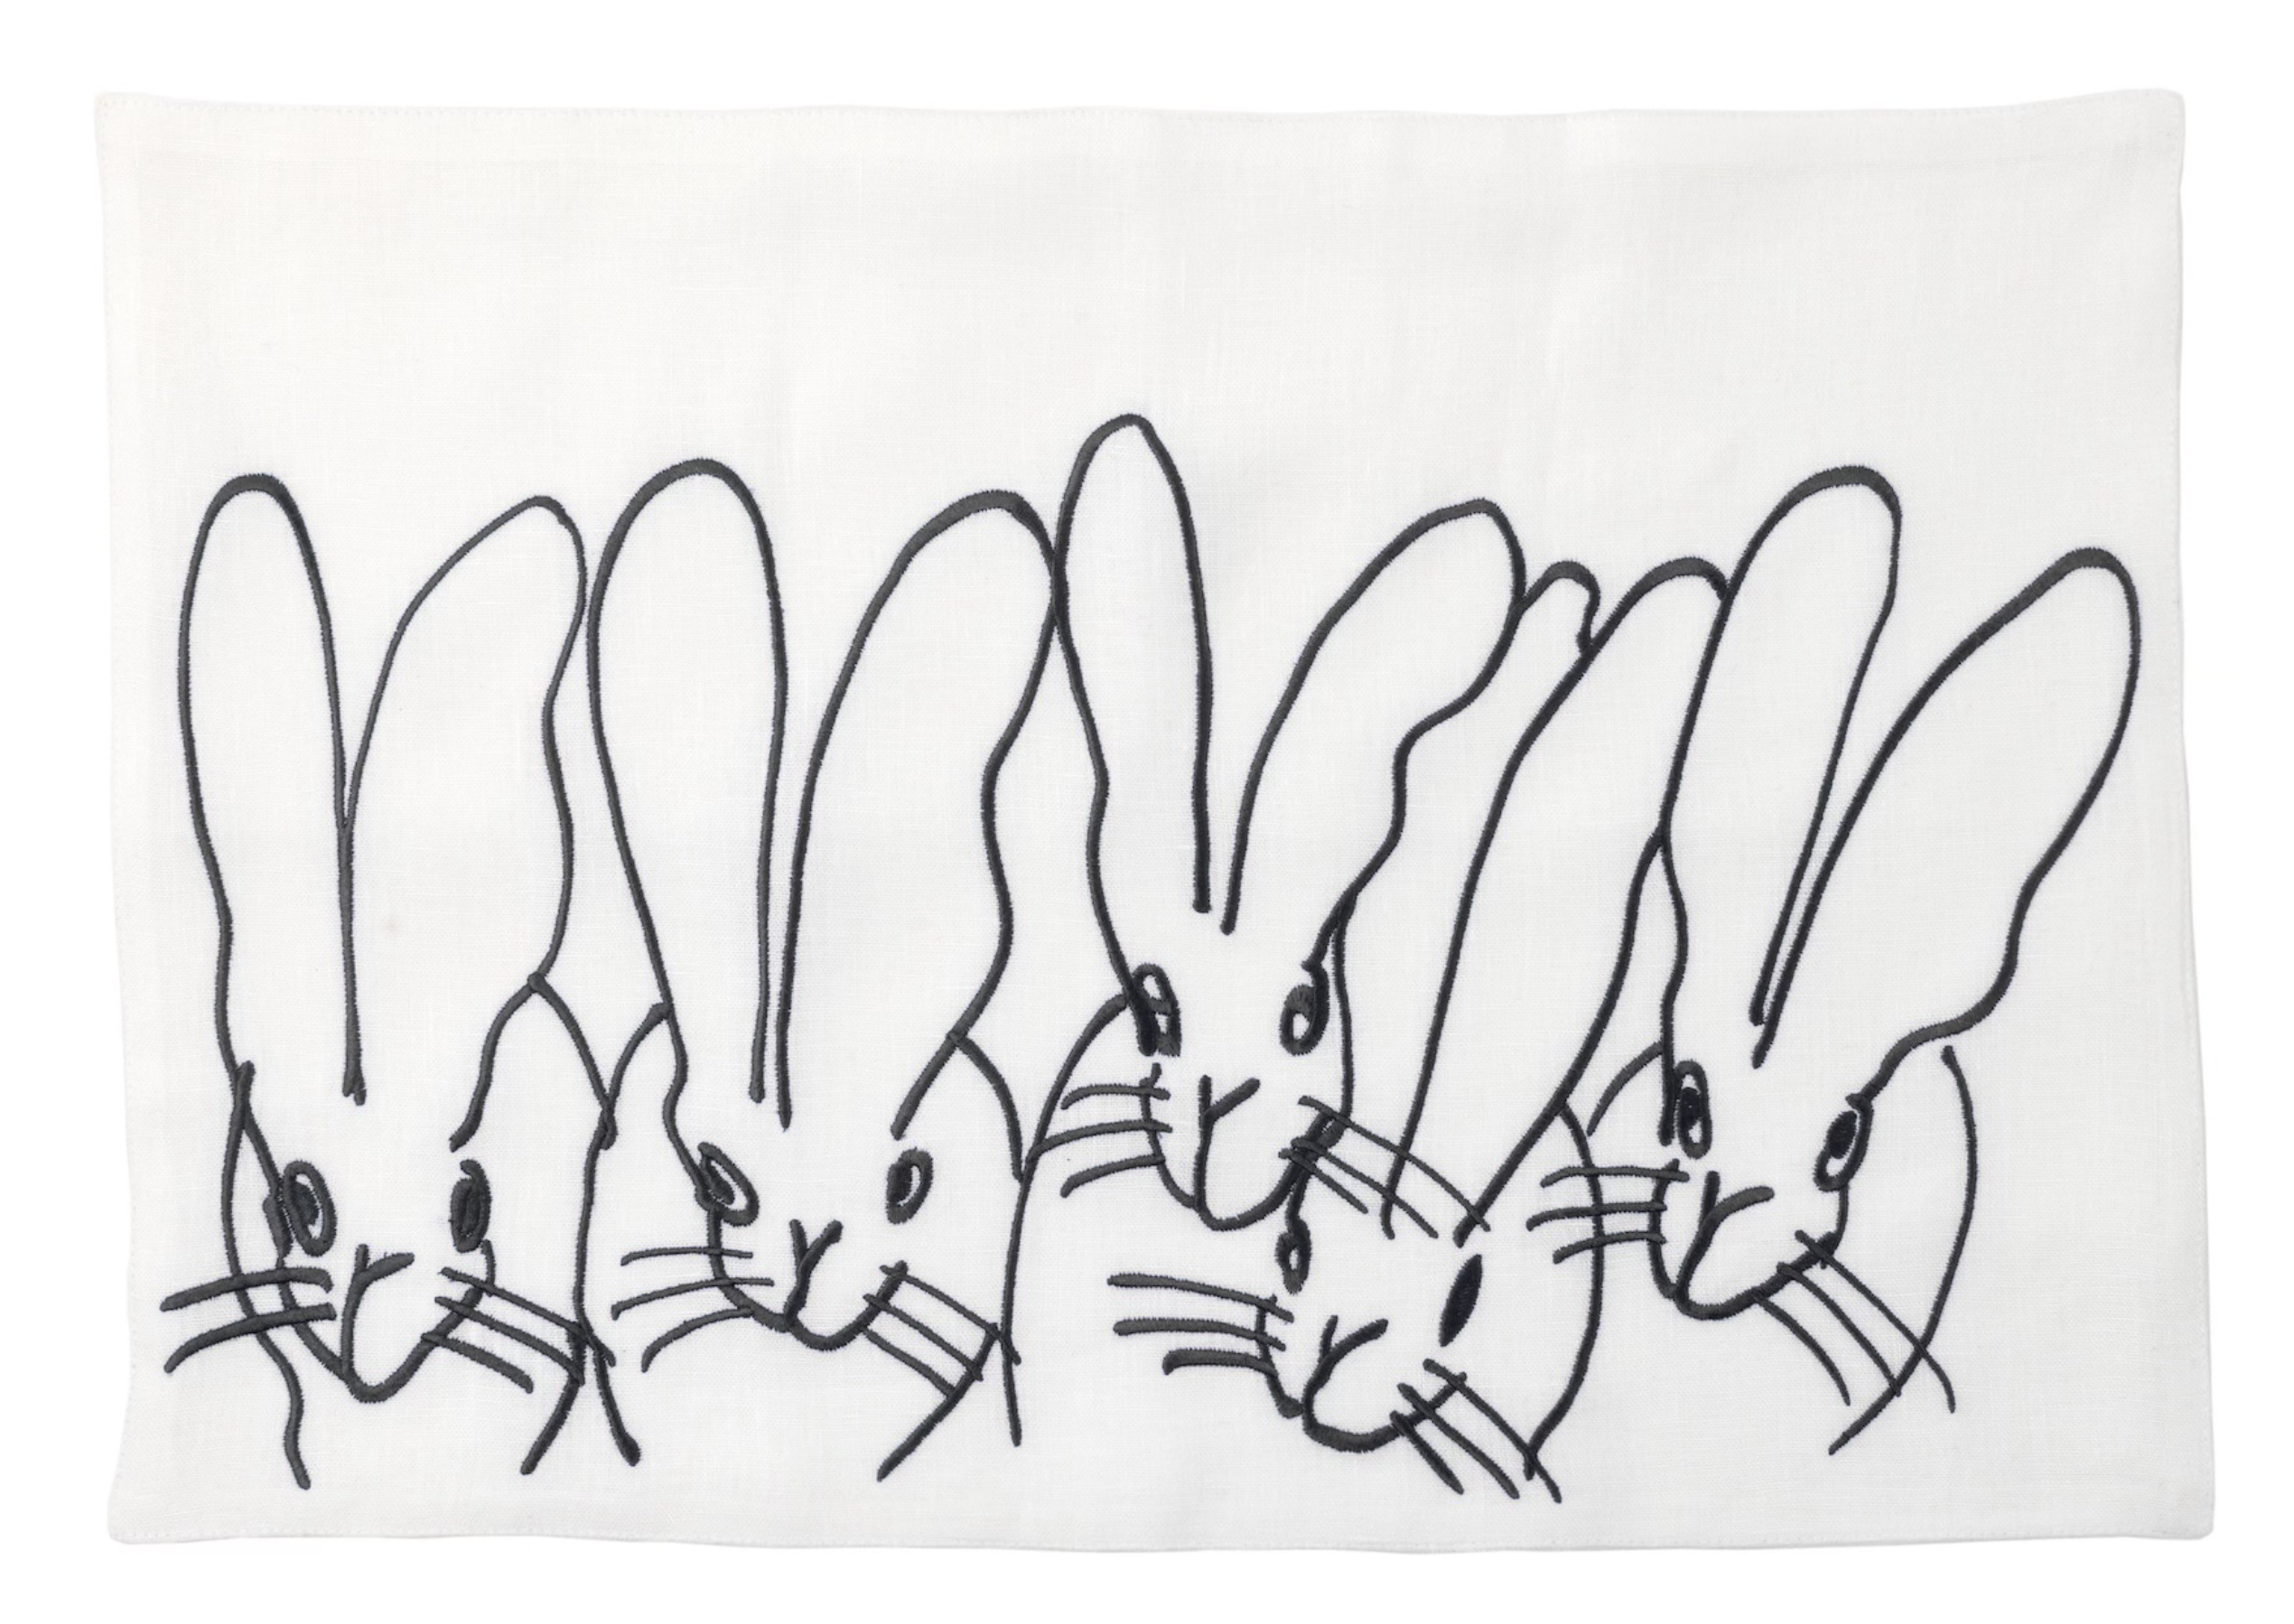 Band of Bunnies Embroidered Linen Placemat, Set of 2, French Blue